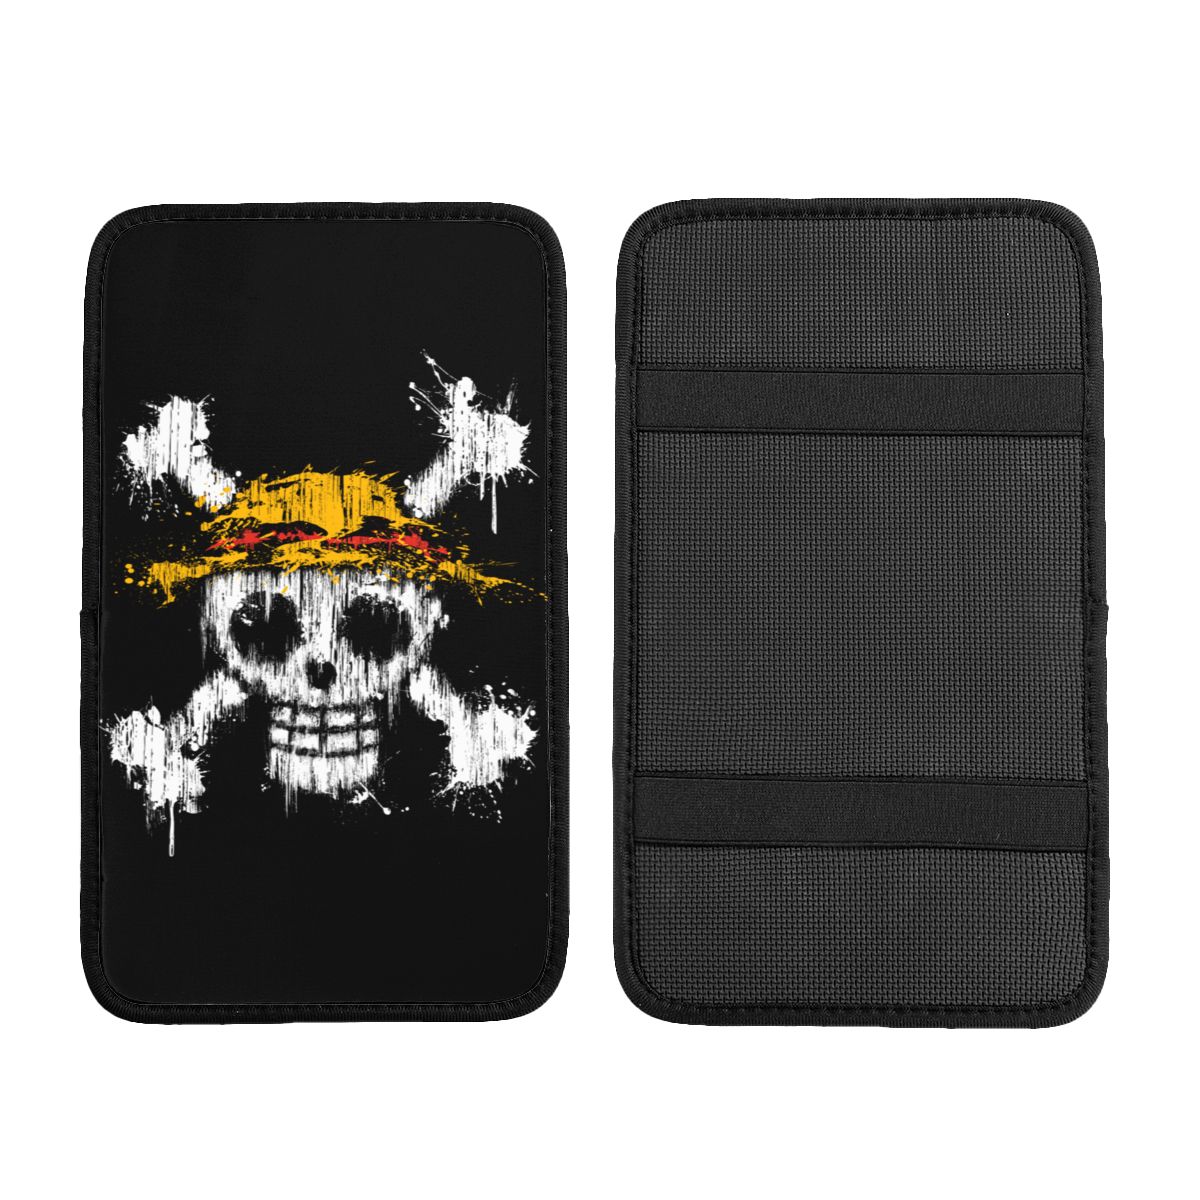 Center Console Cover Pad One Skull Car Armrest Cover Mat Universal Breathable Car Interior CushionStorage Box Pad Cushion, one piece, everythinganimee